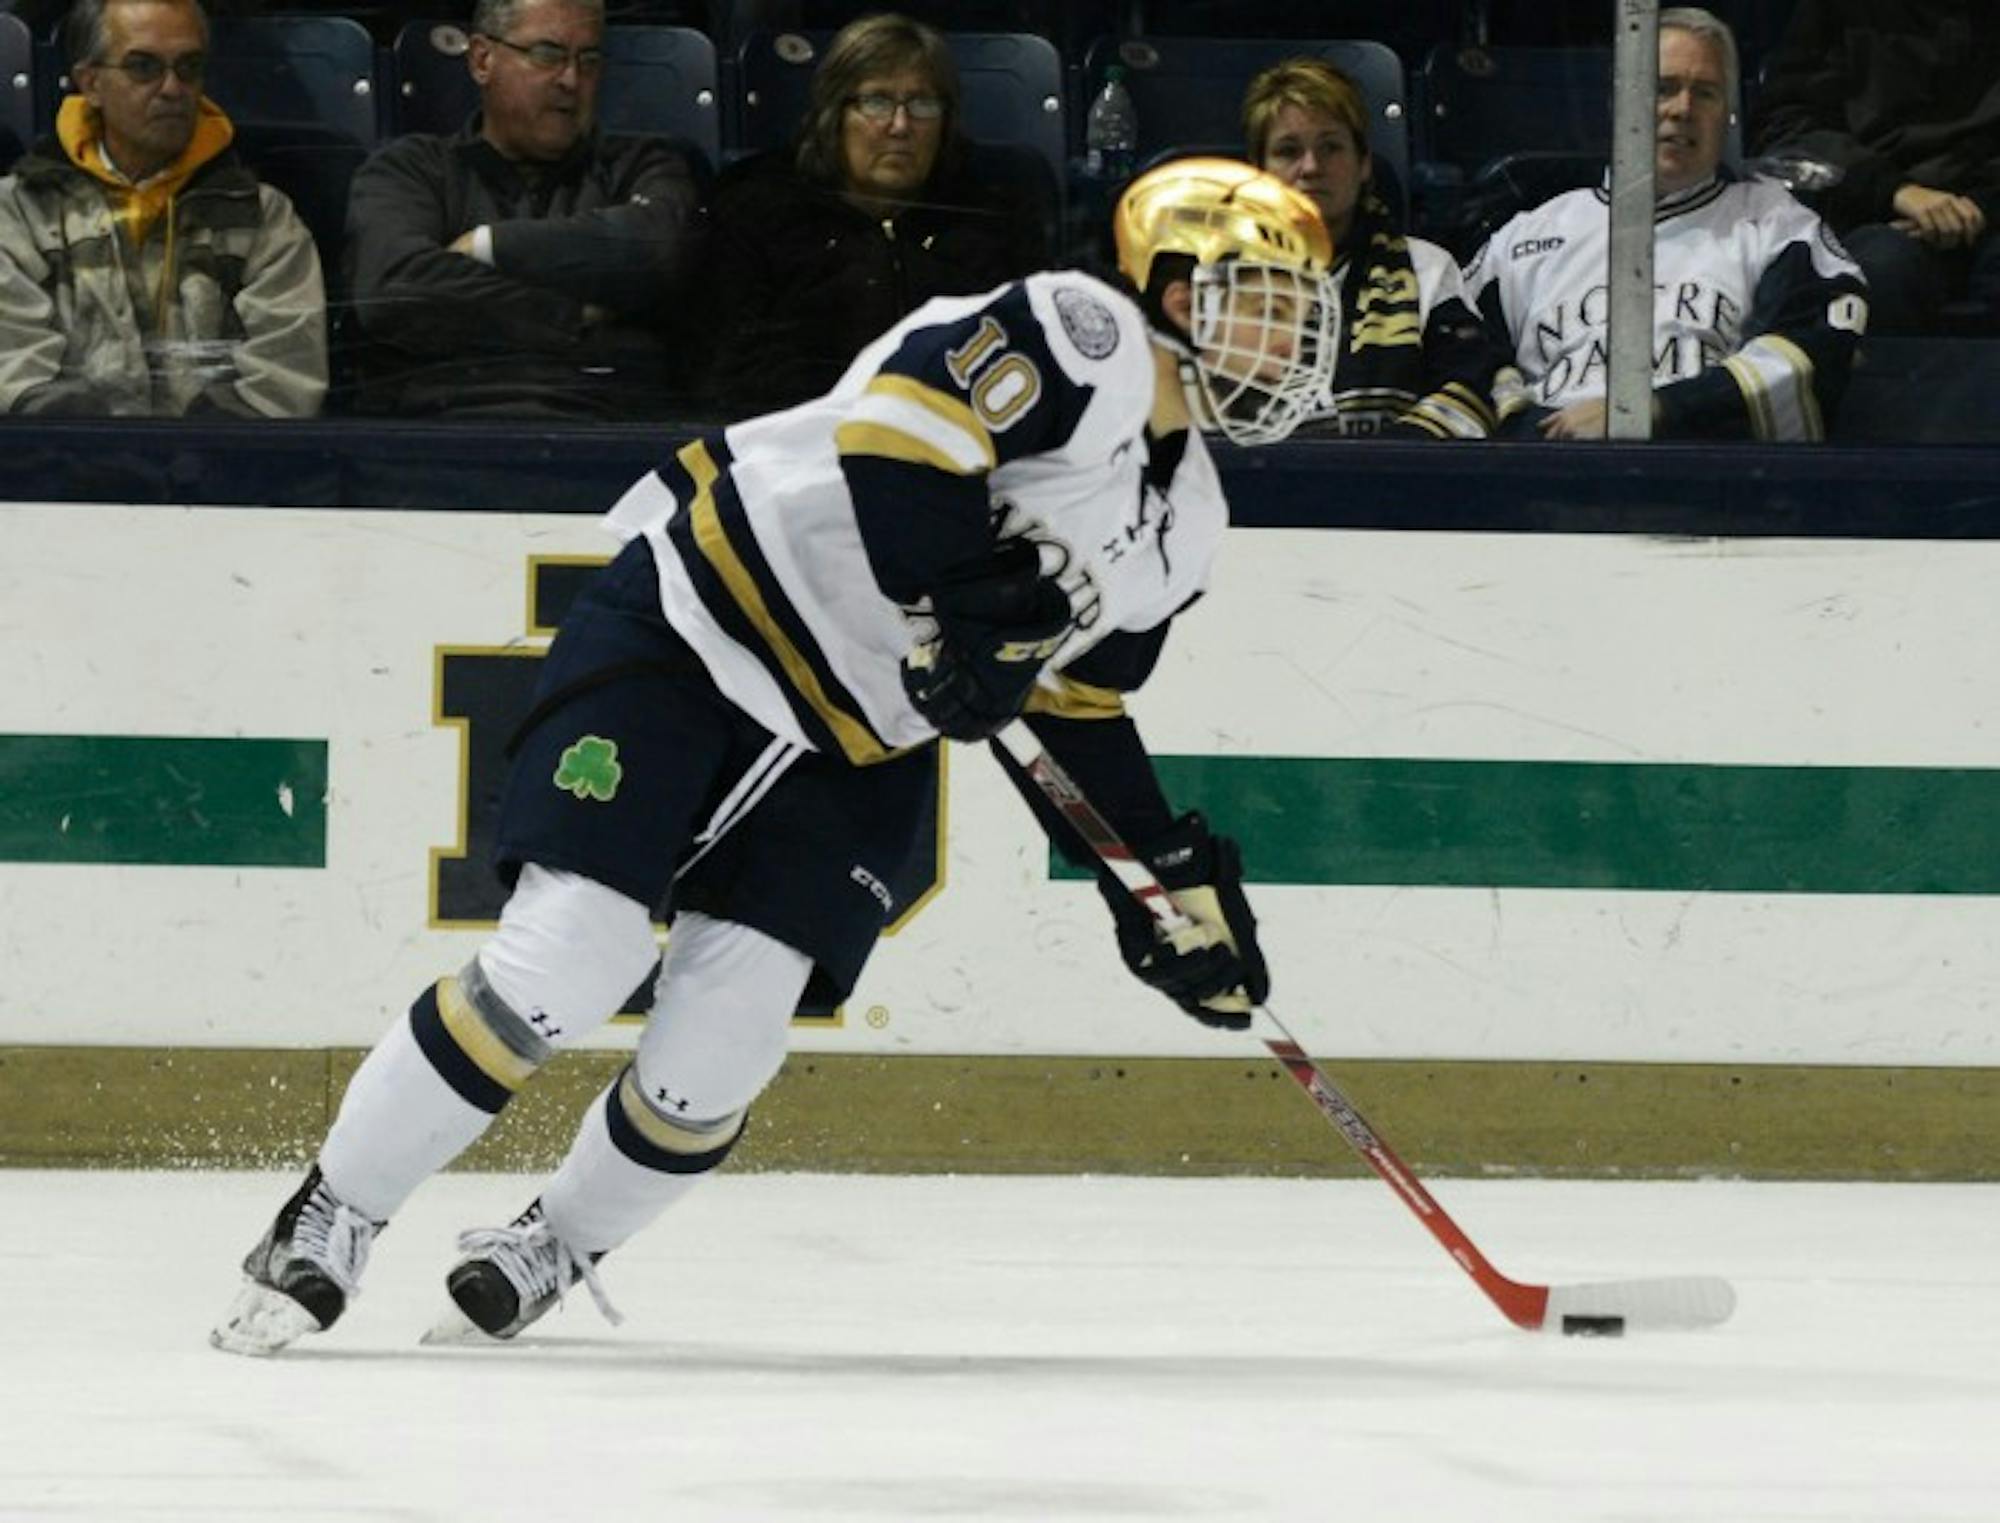 Irish sophomore left wing Anders Bjork carries the puck during Notre Dame’s 3-2 win over Northeastern on Nov. 12 at Compton Family Ice Arena. Notre Dame took 15 penalties in two games last weekend.